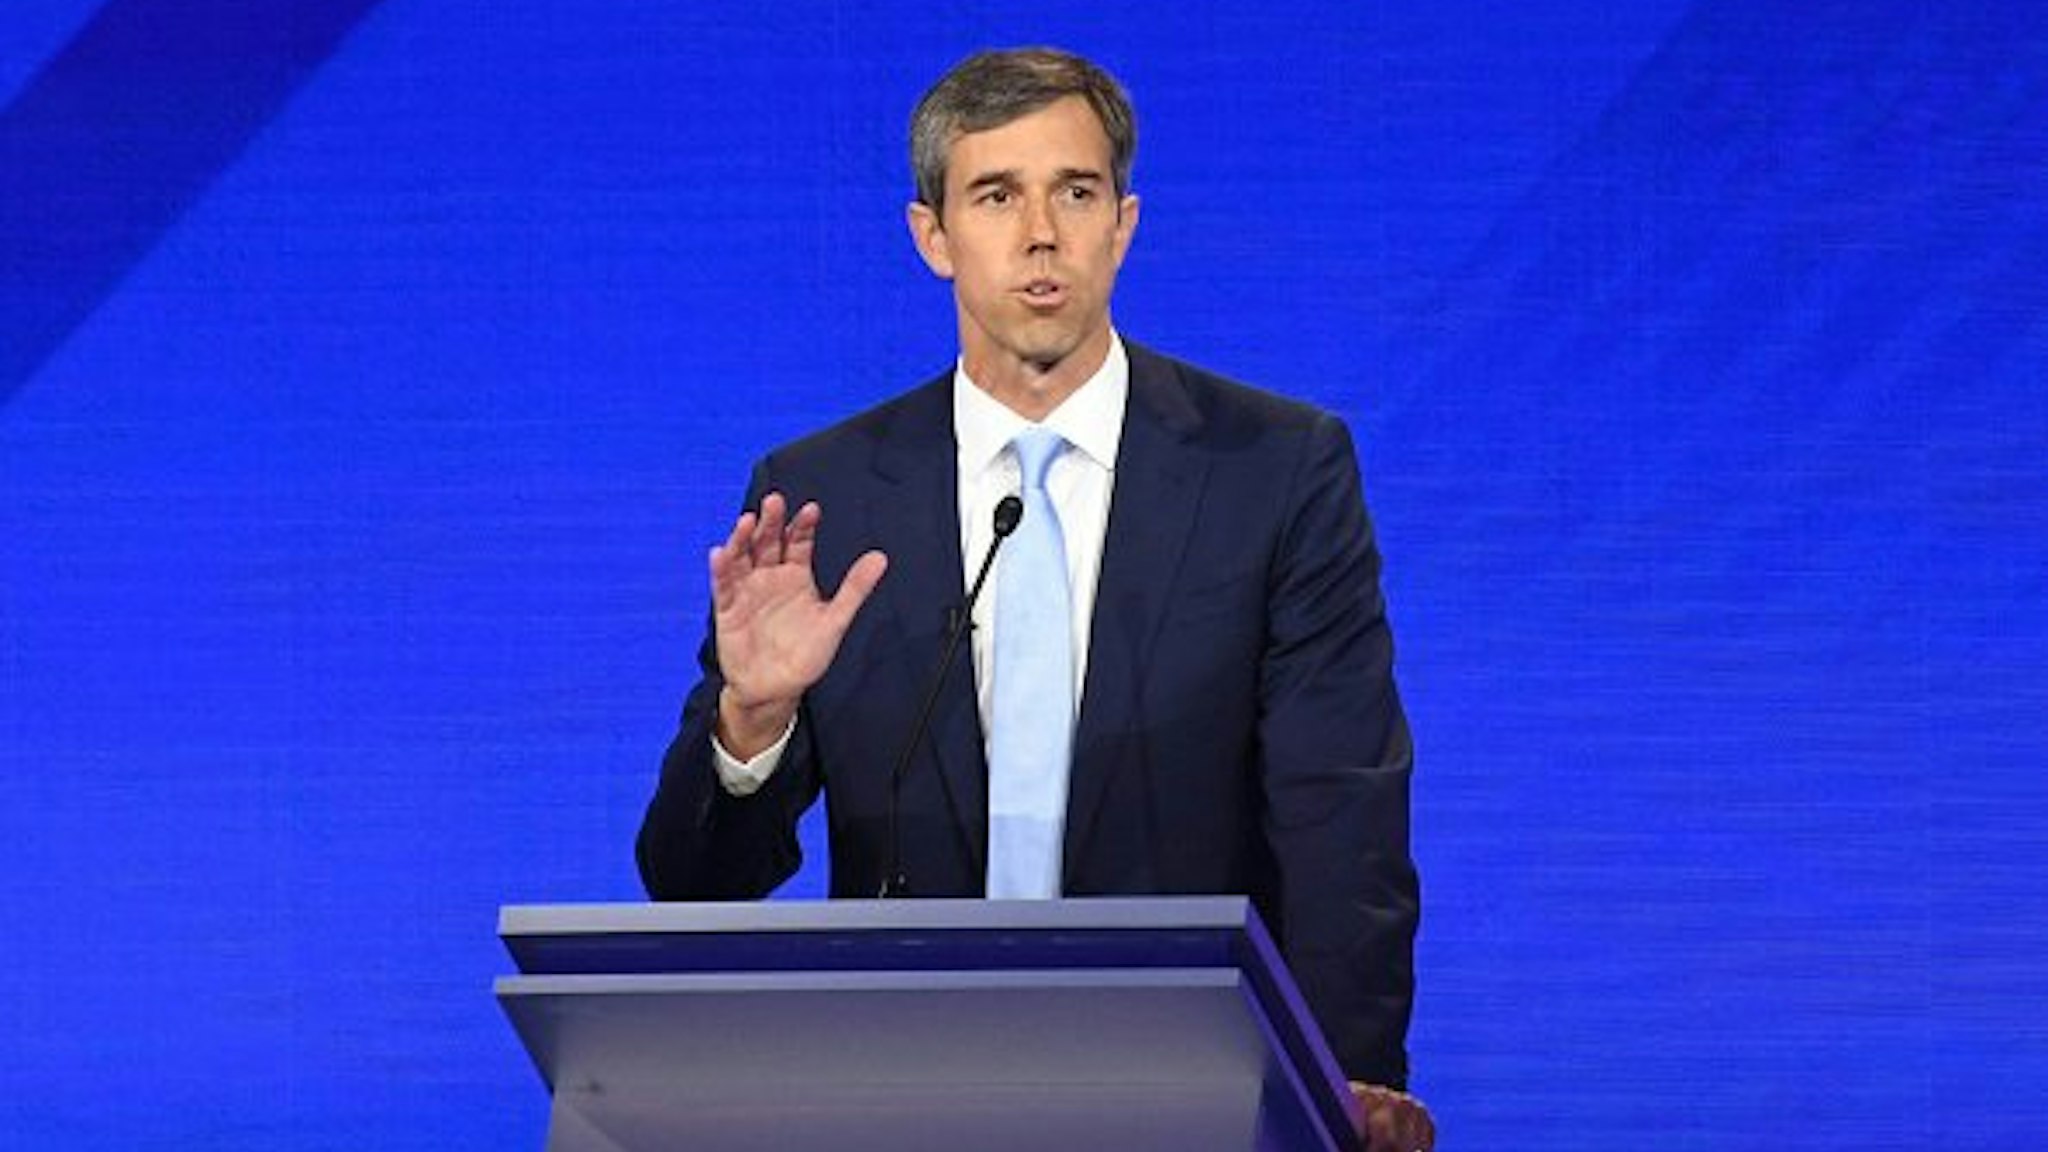 Democratic presidential hopeful former Texas Representative Beto O'Rourke speaks during the third Democratic primary debate of the 2020 presidential campaign season hosted by ABC News in partnership with Univision at Texas Southern University in Houston,